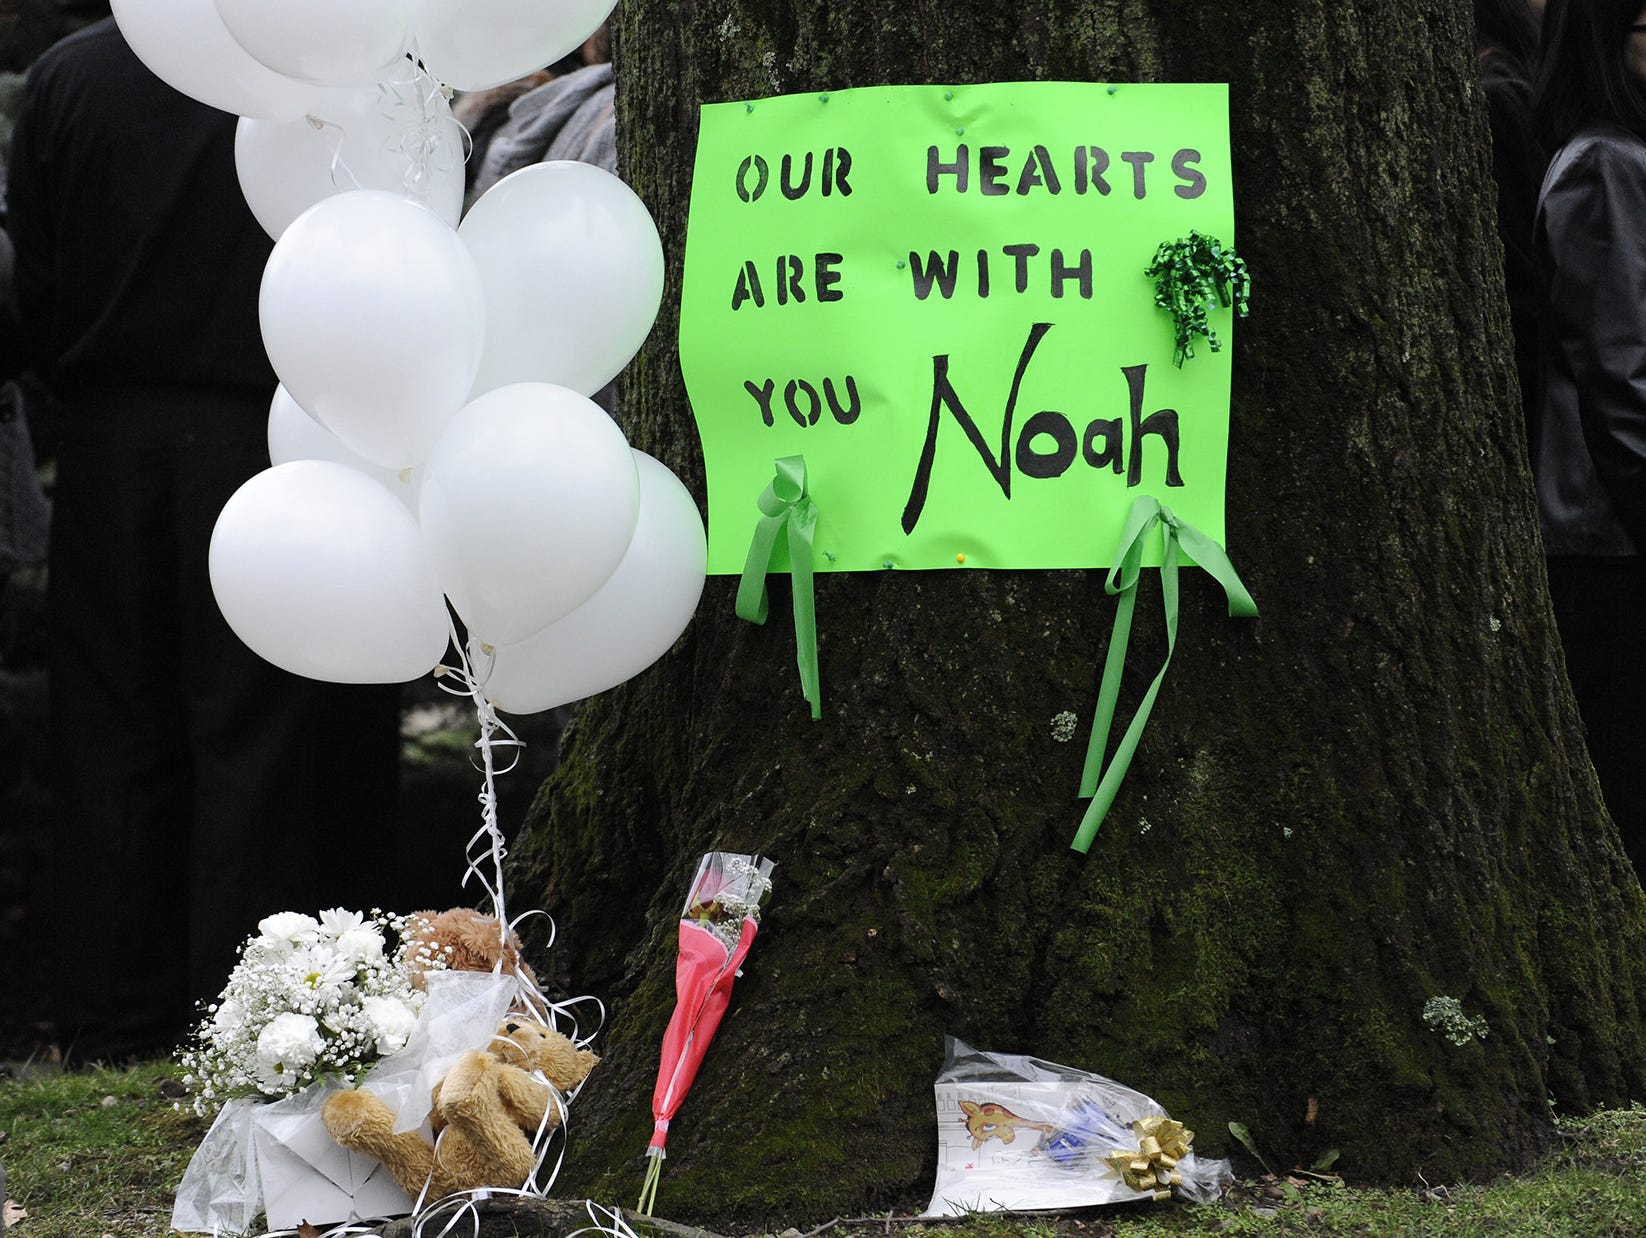 A memorial for Noah Pozner outside his funeral in Fairfield, Conn., on Dec. 17, 2012.